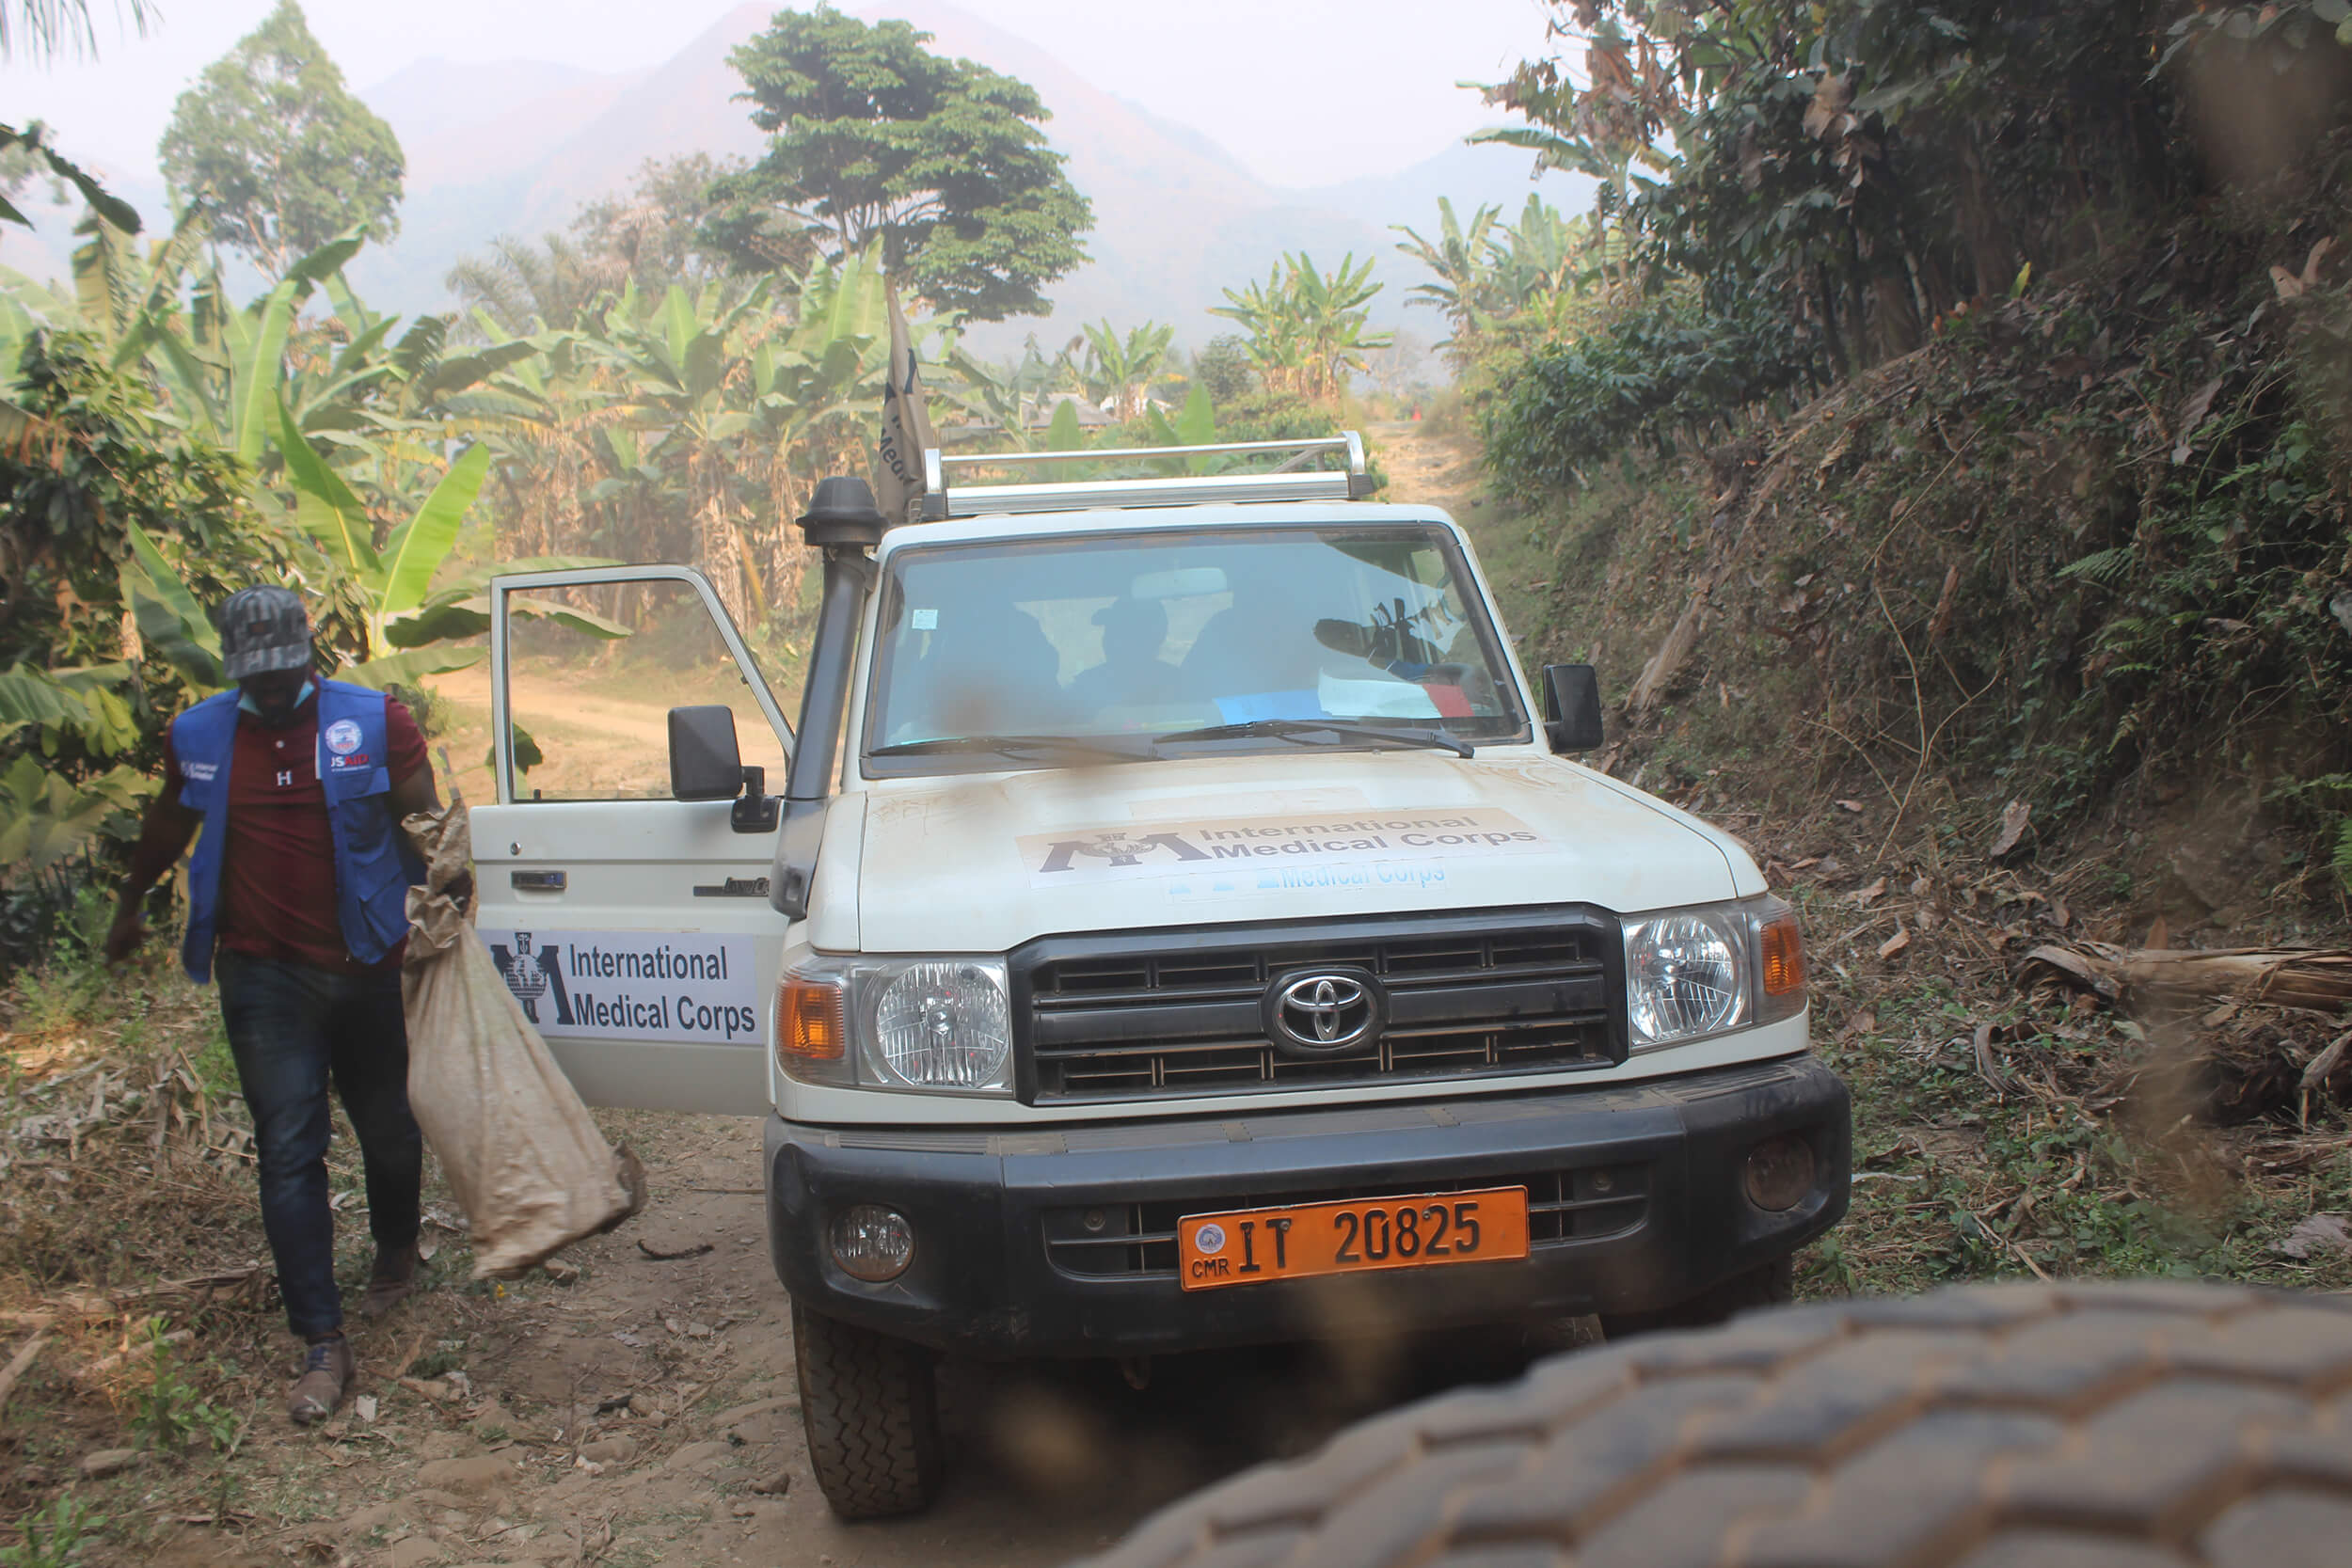 Operating in the Northeast region of Cameroon can be challenging due to road conditions and security risks.